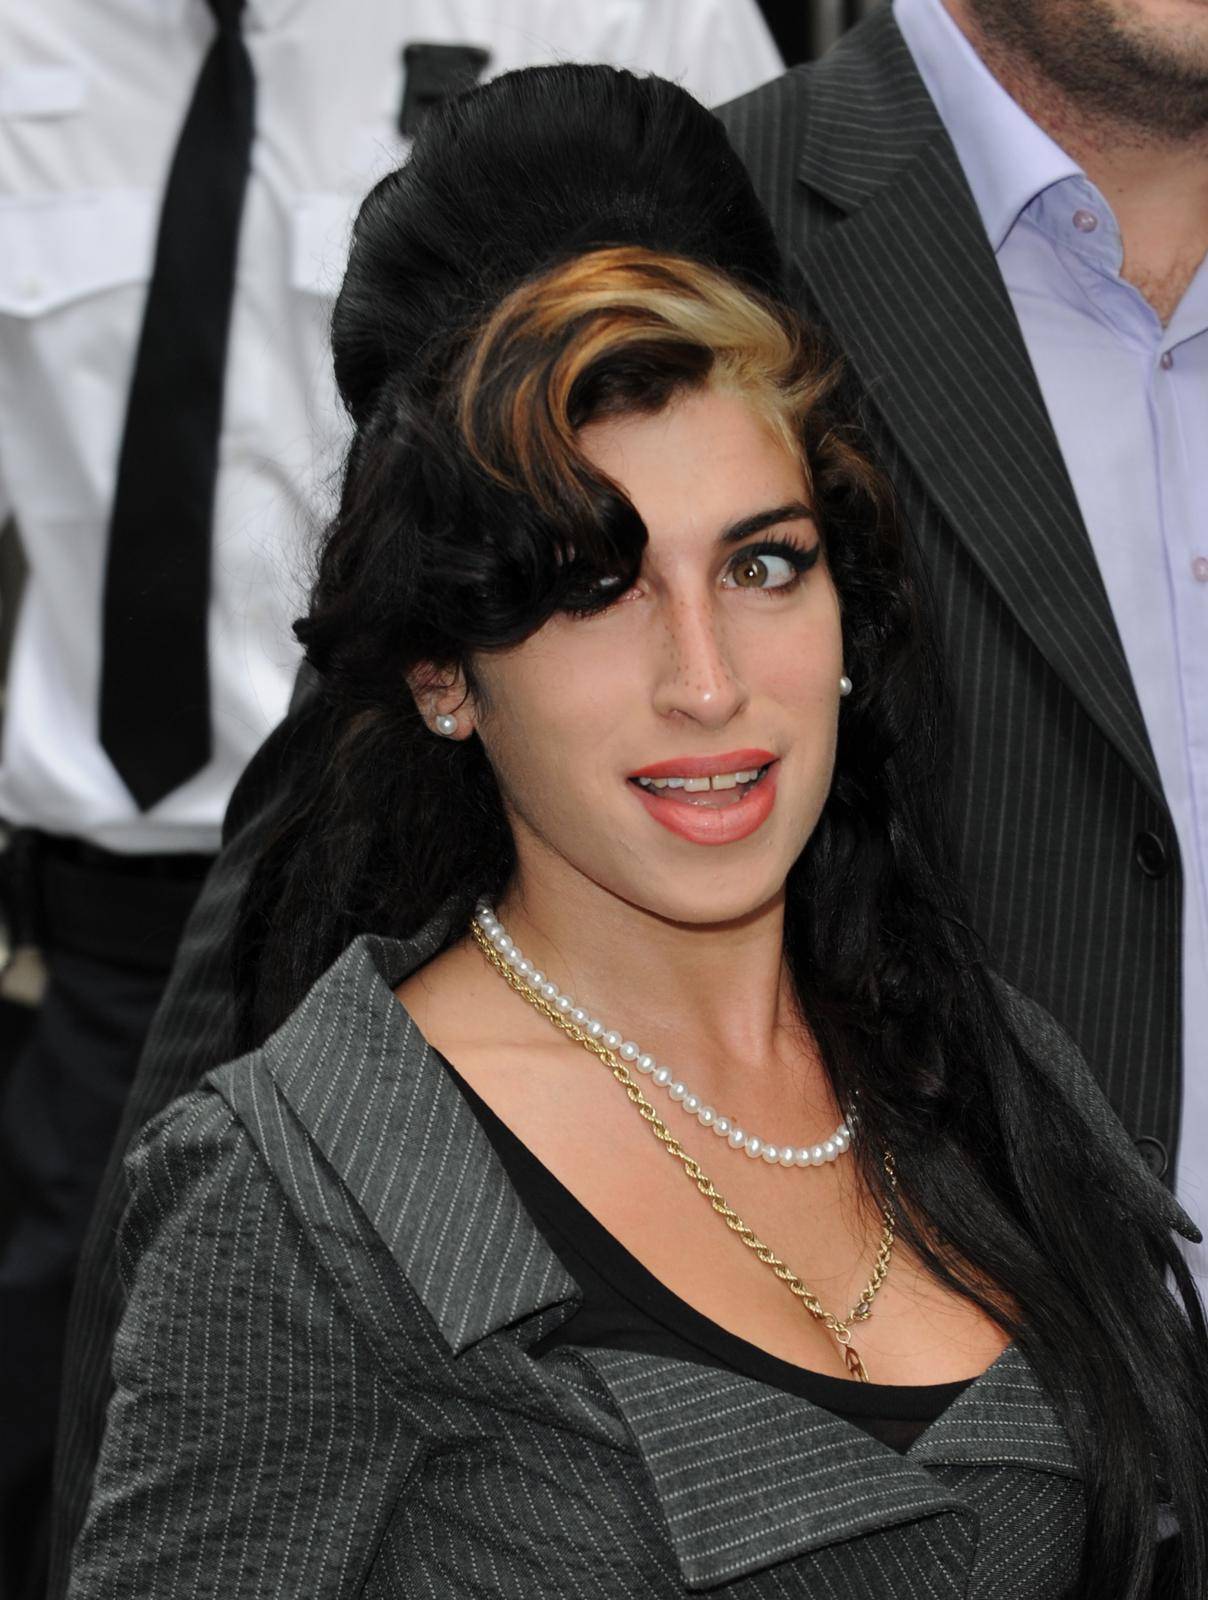 Amy Winehouse arrives at court - London